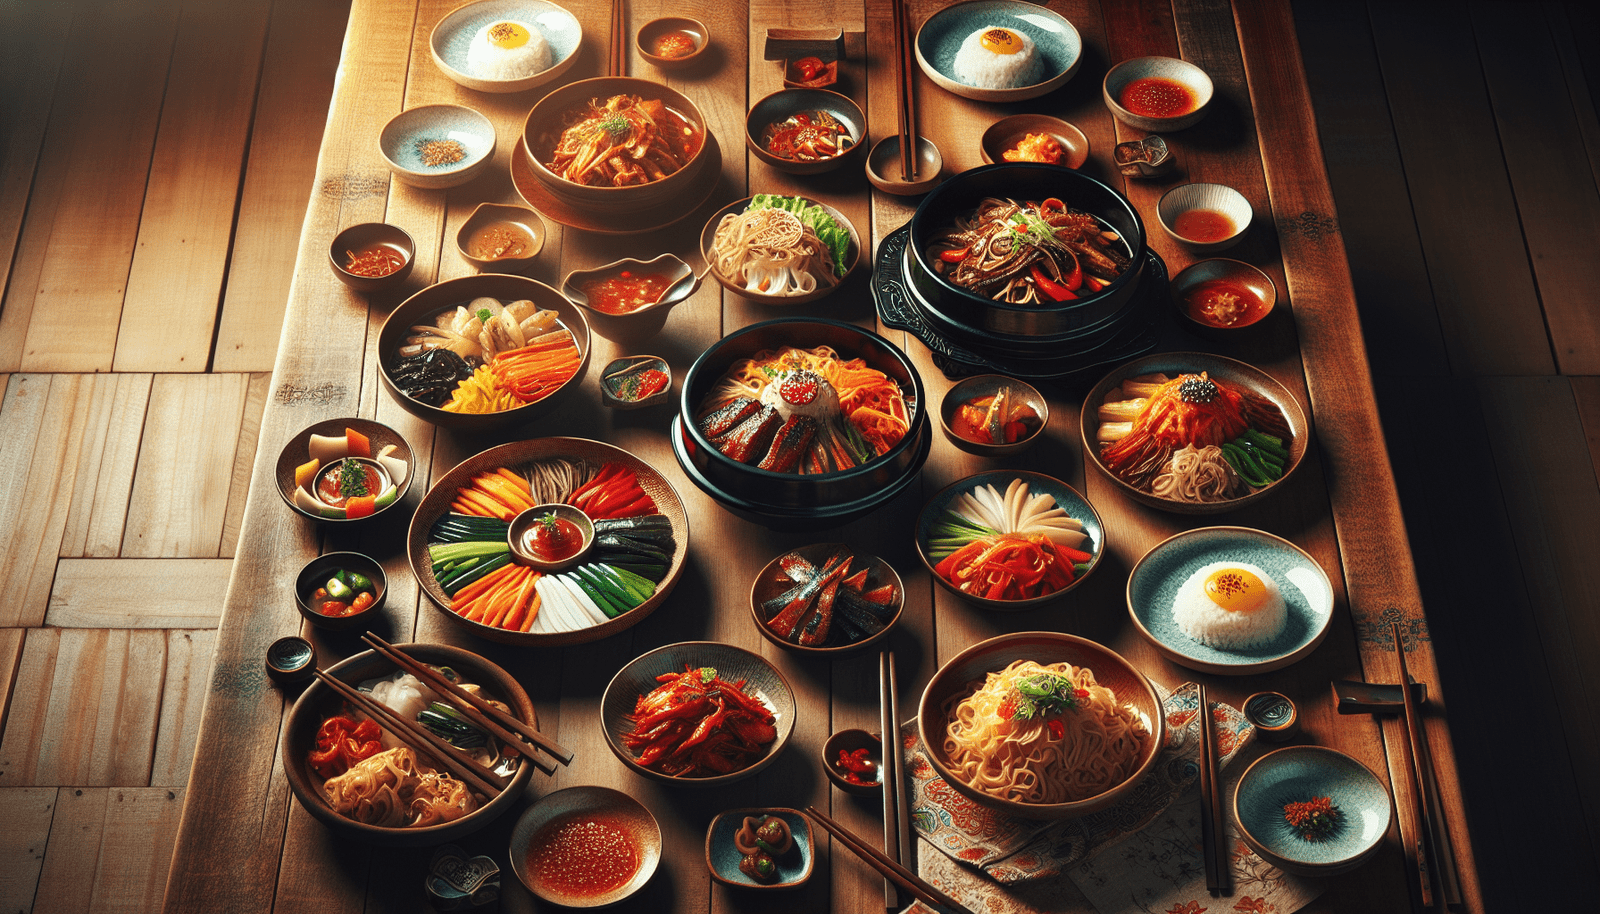 Can You Recommend Traditional Korean Dishes That Are Suitable For A Hanjeongsik (full-course Meal)?